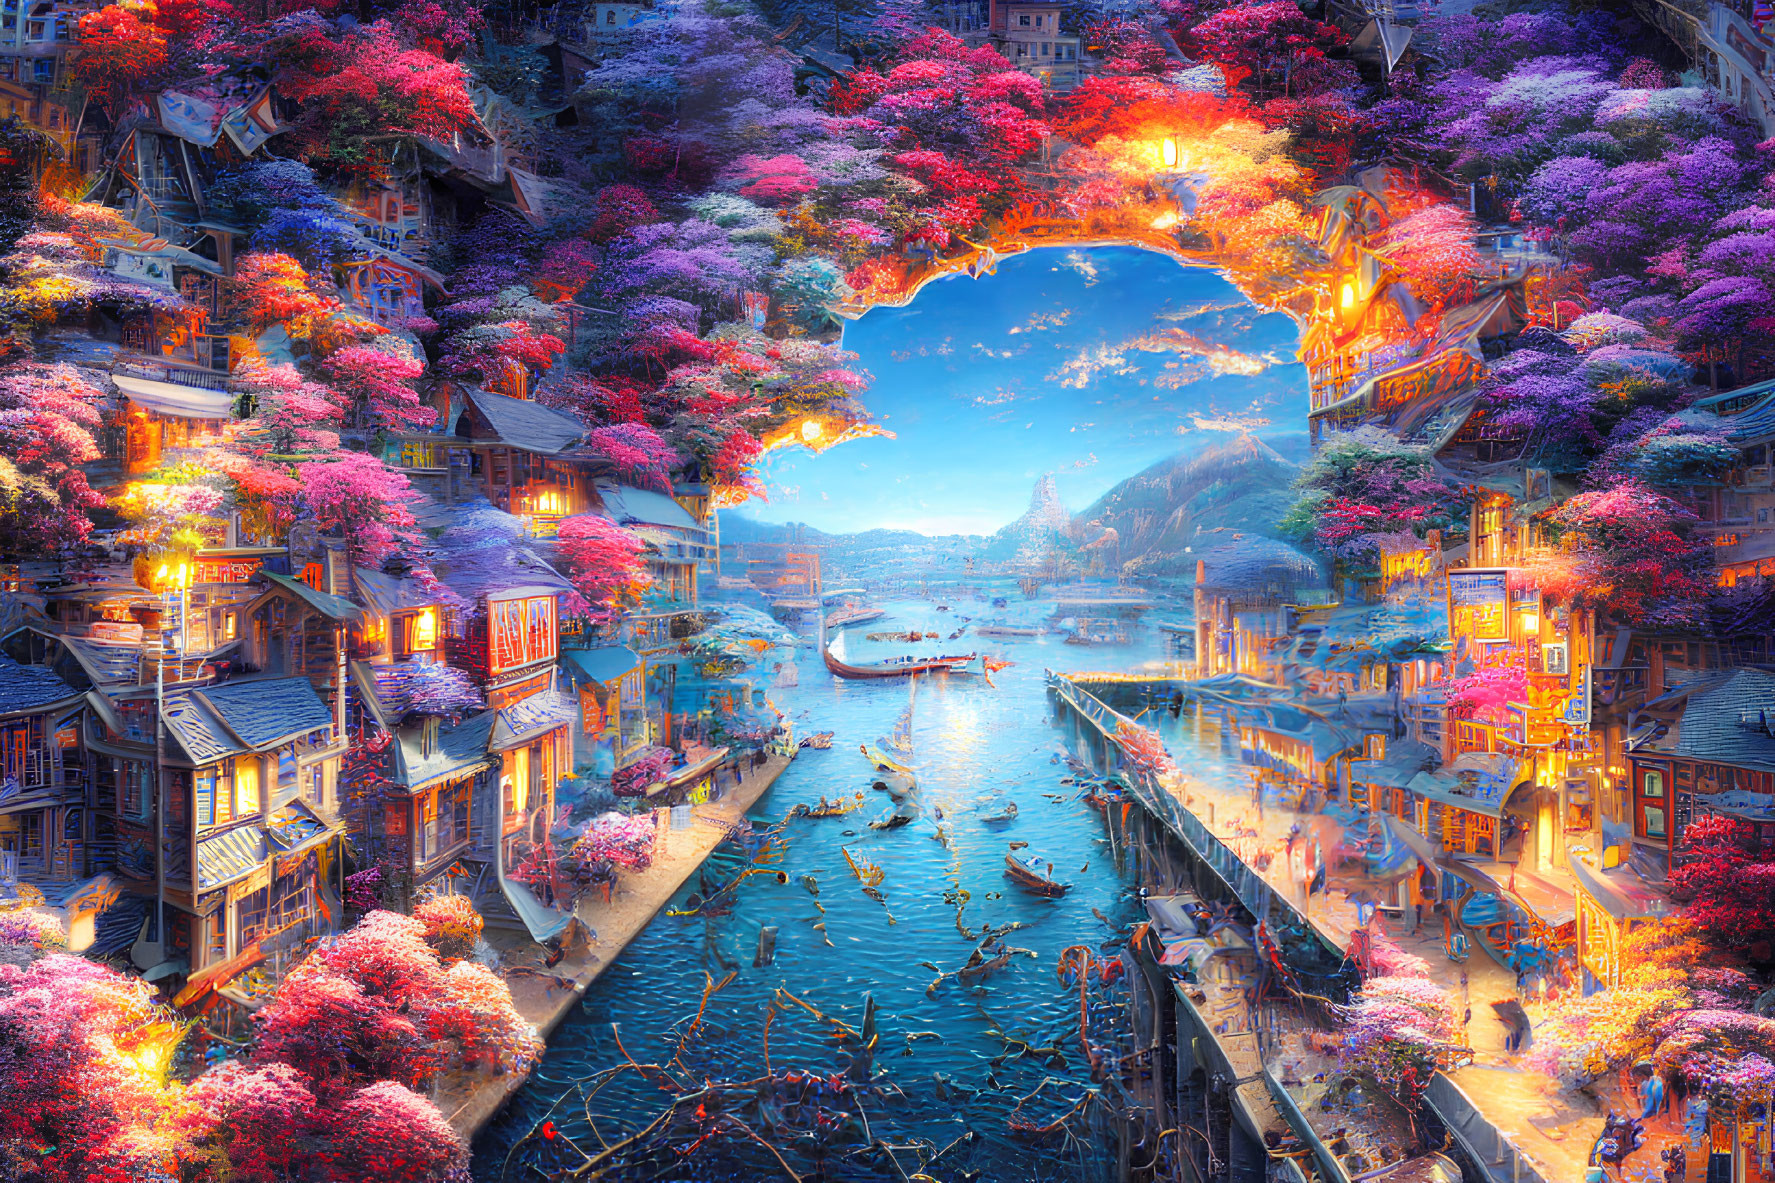 Colorful Blossoming Trees and Traditional Architecture in a Fantastical Canal City